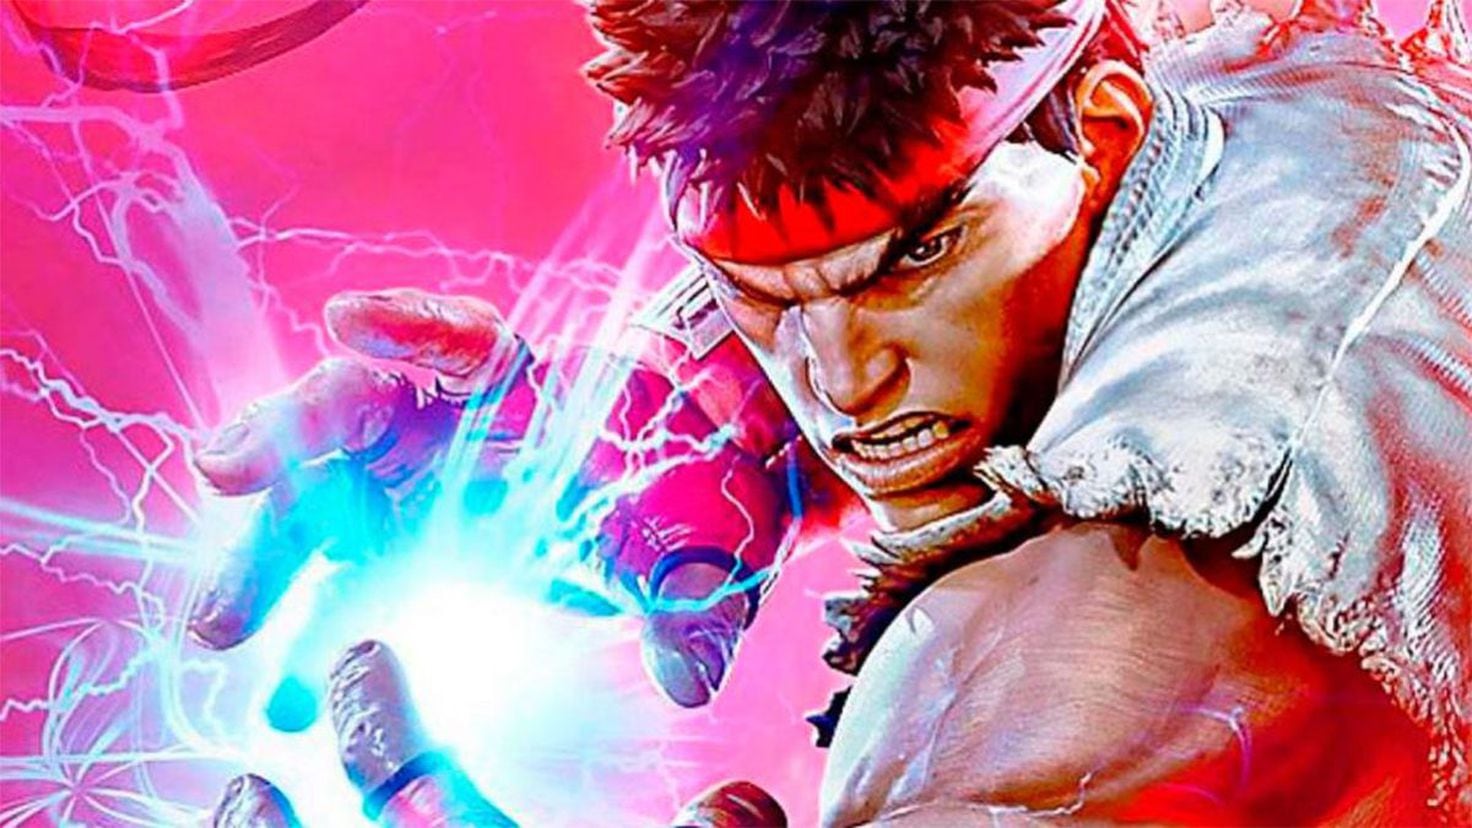 Starting today, Street Fighter 5 is one of the free games in